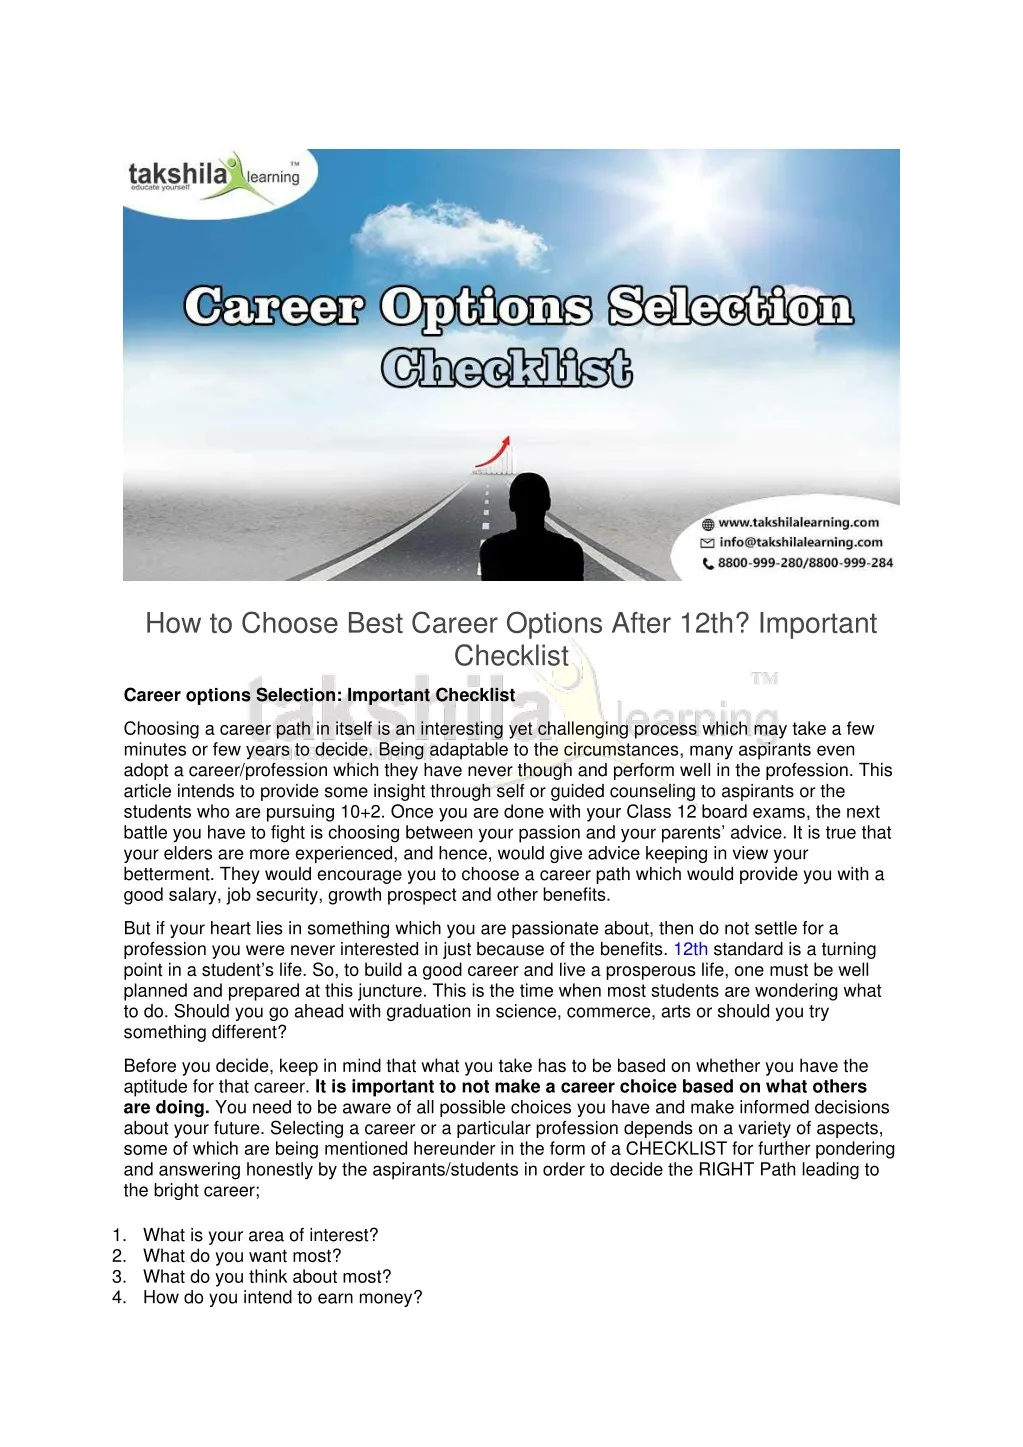 how to choose best career options after 12th